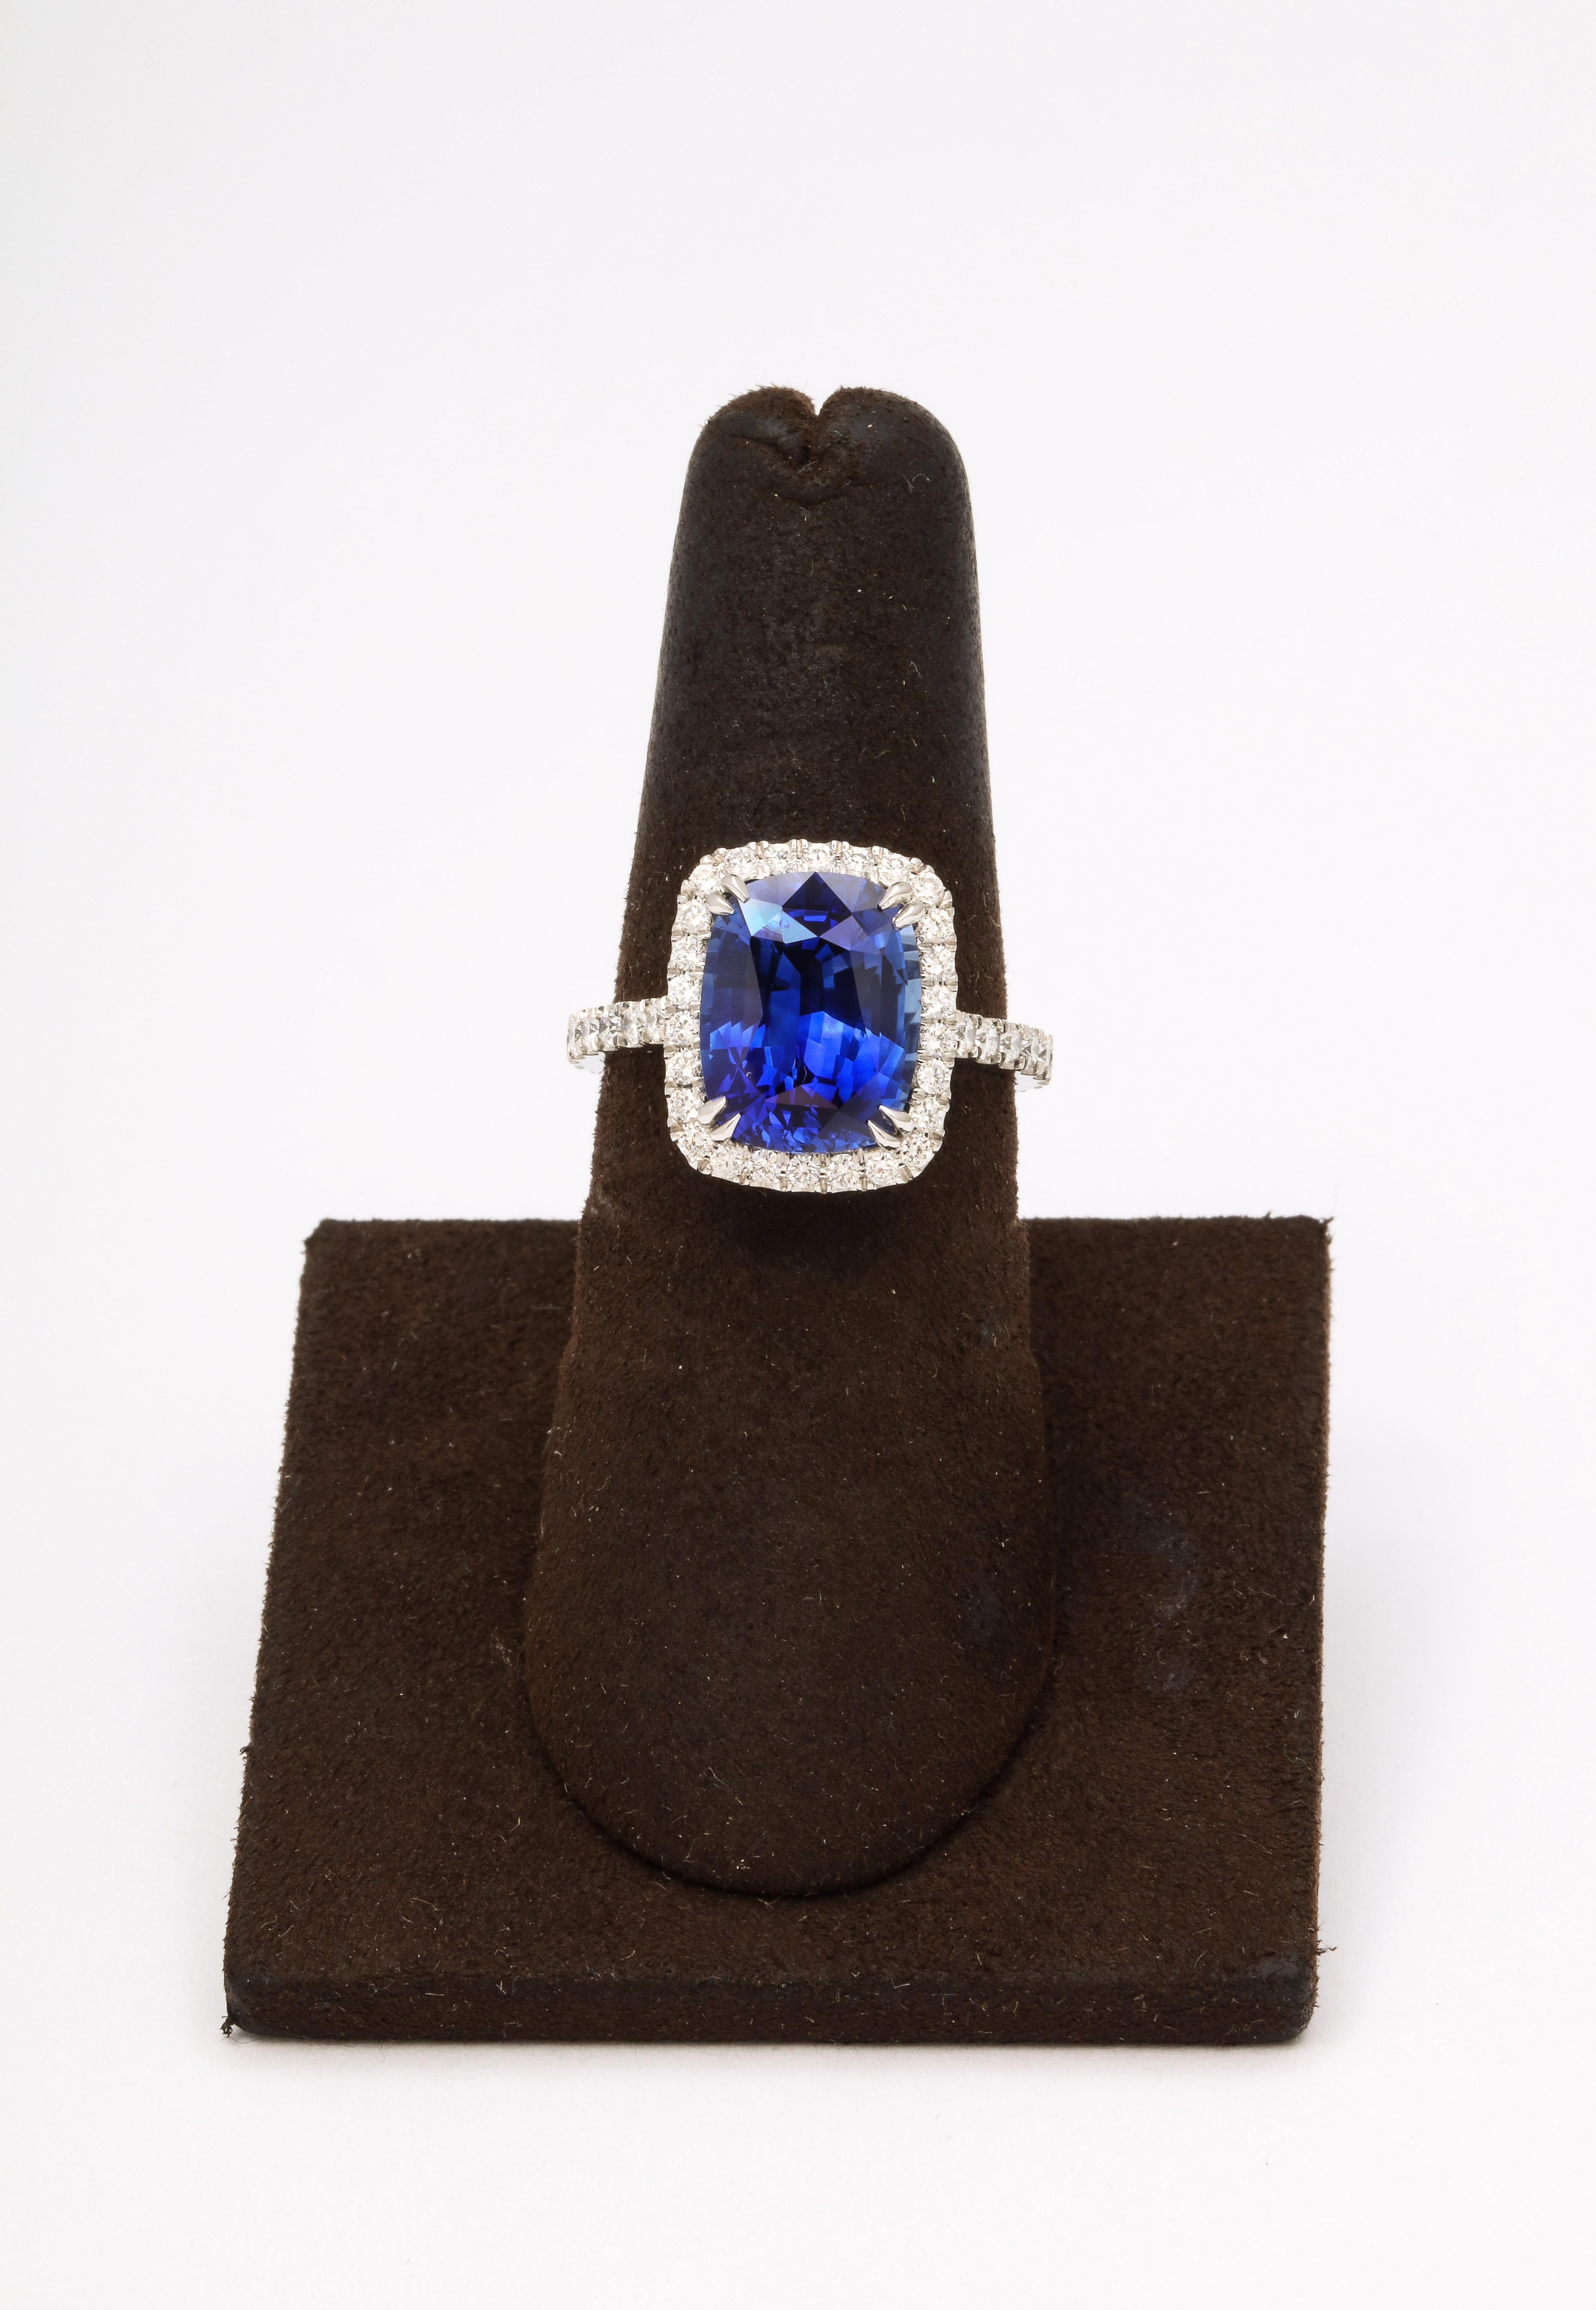 
A STUNNING Ceylon Sapphire!! 

The most sought after shape!

Certified 5.50 carat Elongated Cushion Cut VIVID BLUE sapphire set in a custom made platinum mounting with .85 carats of colorless white round brilliant cut diamonds. 

Currently a size